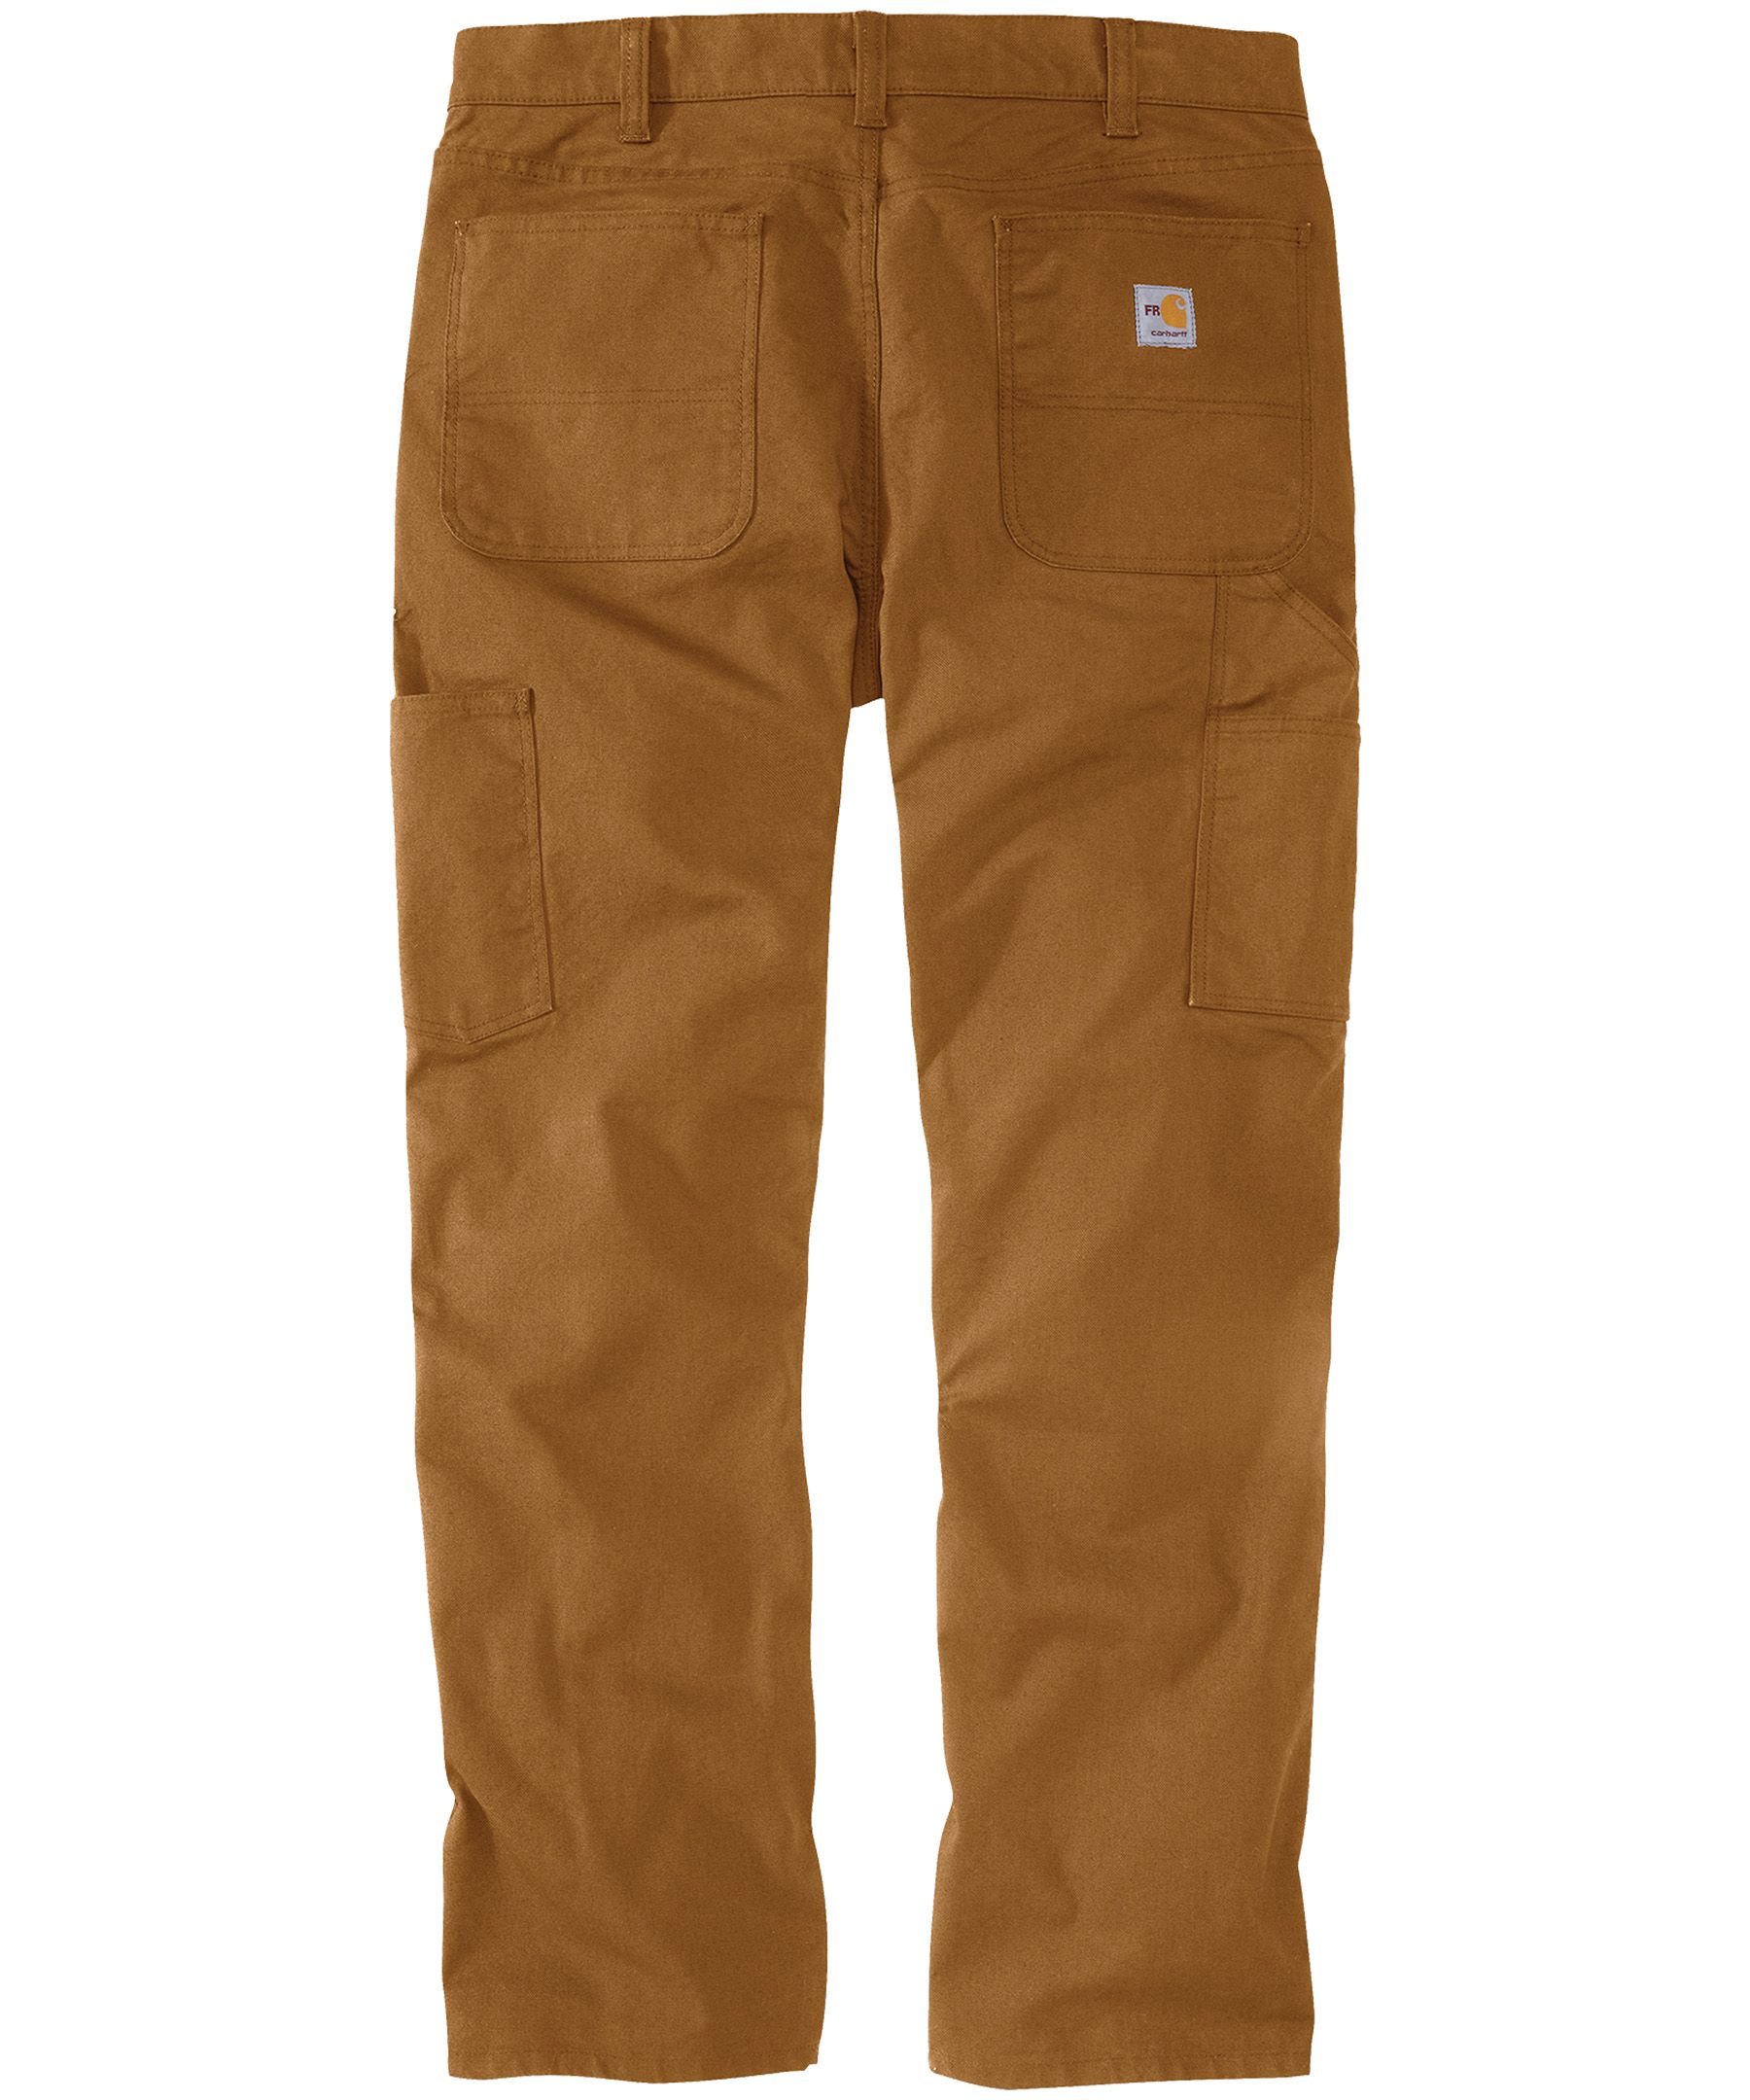 Carhartt Mens Rugged Flex® Relaxed Fit Duck Utility Work Pant